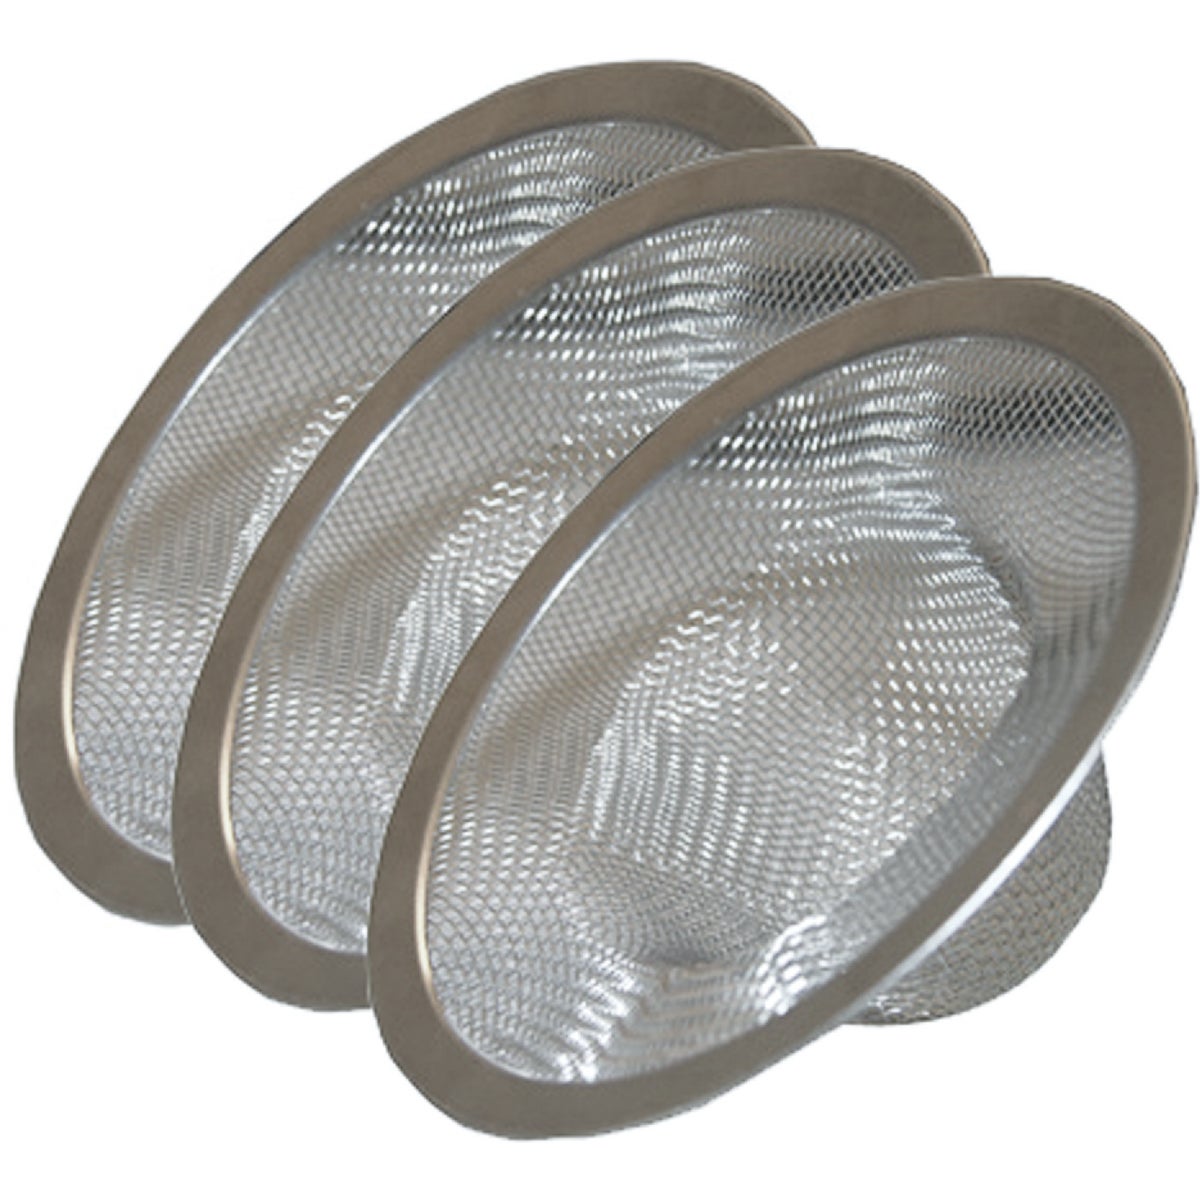 Lasco Assorted Size Stainless Steel Drain Strainer (3-Pack)